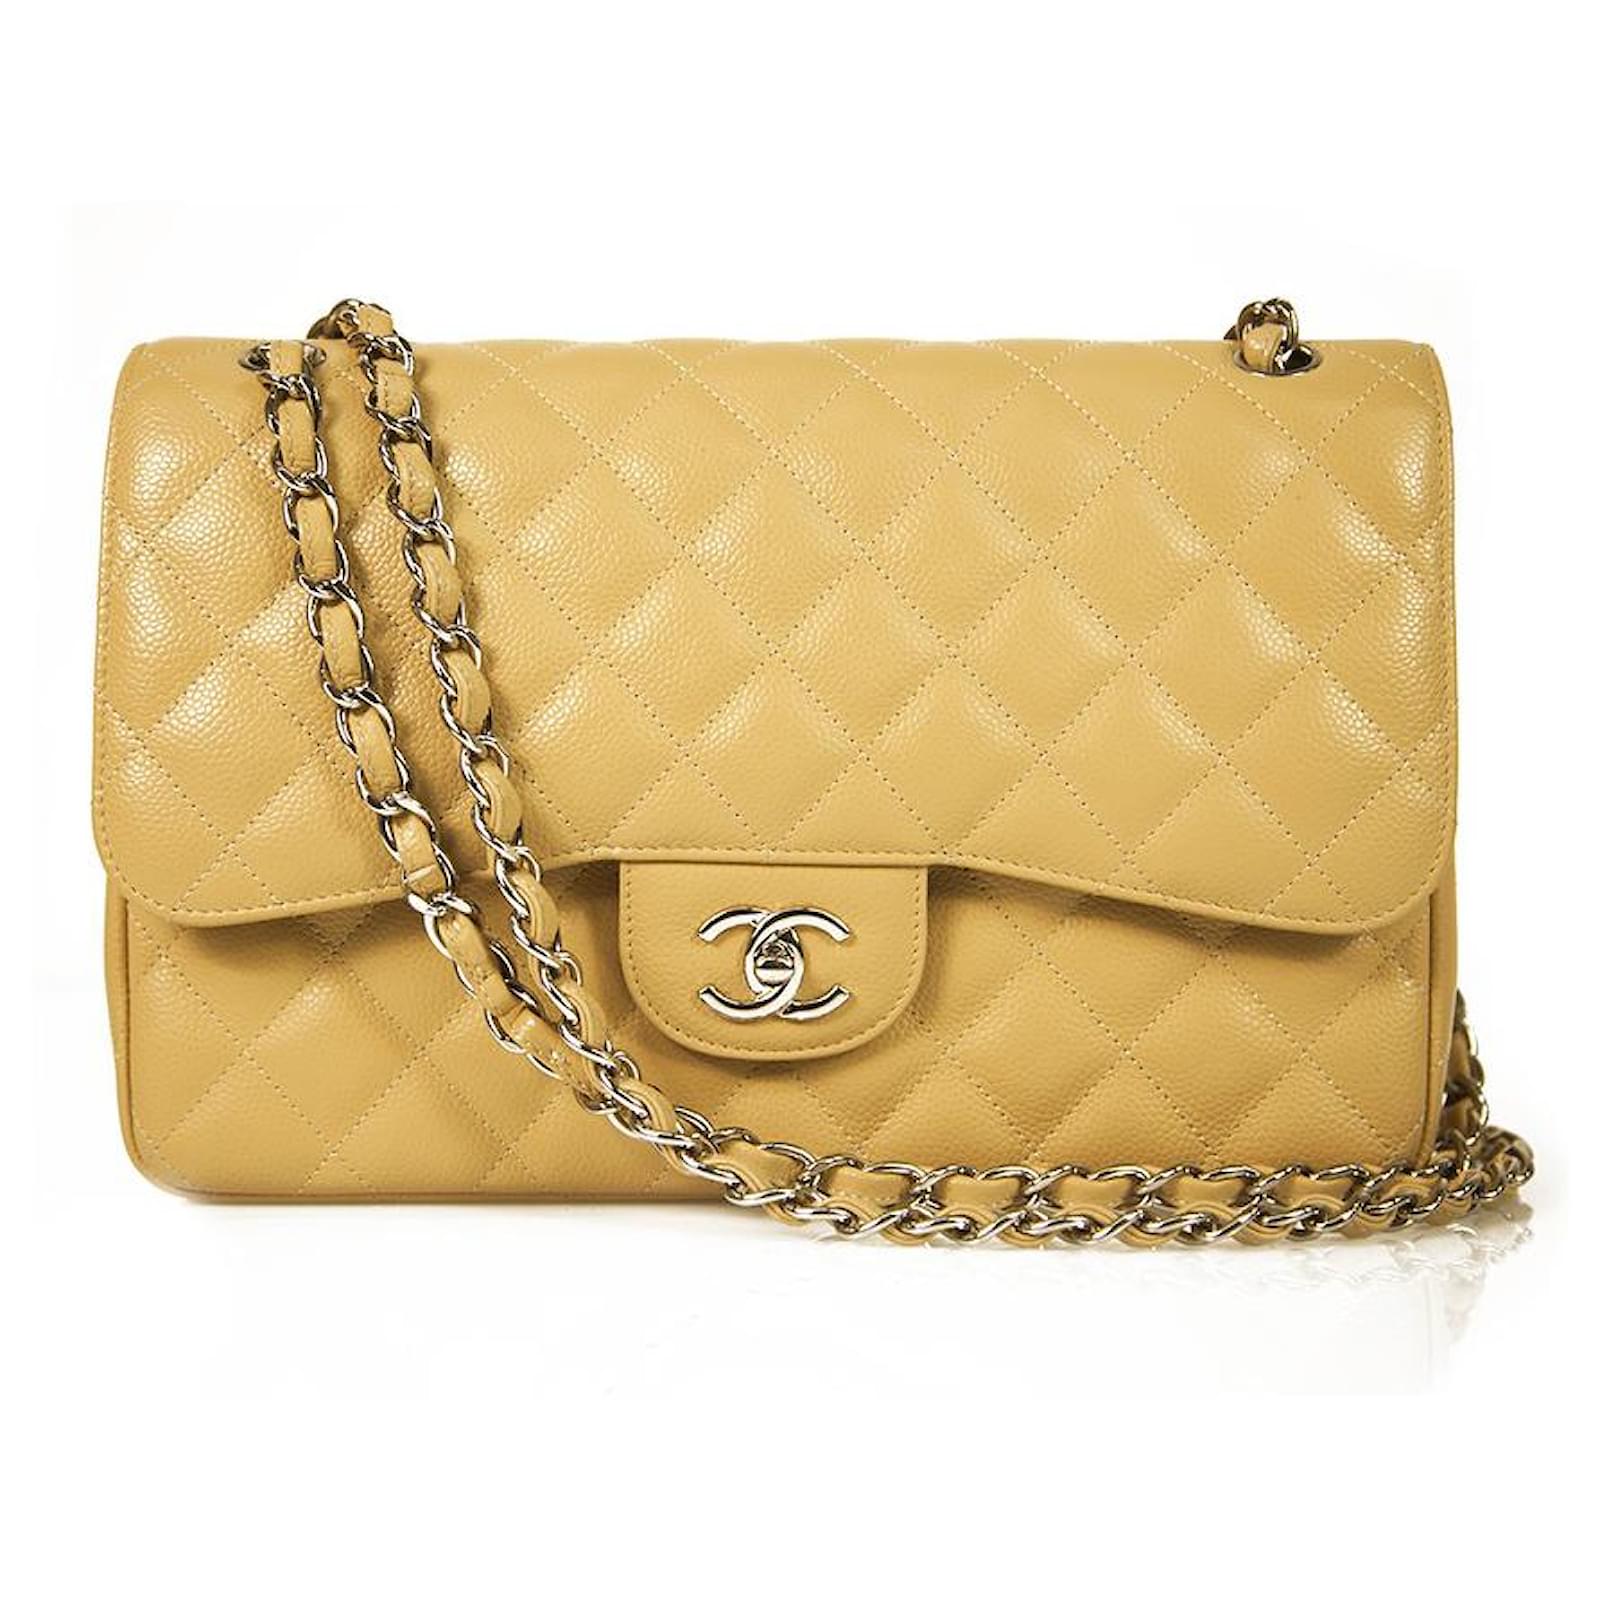 Timeless/classique leather crossbody bag Chanel Beige in Leather - 30121188